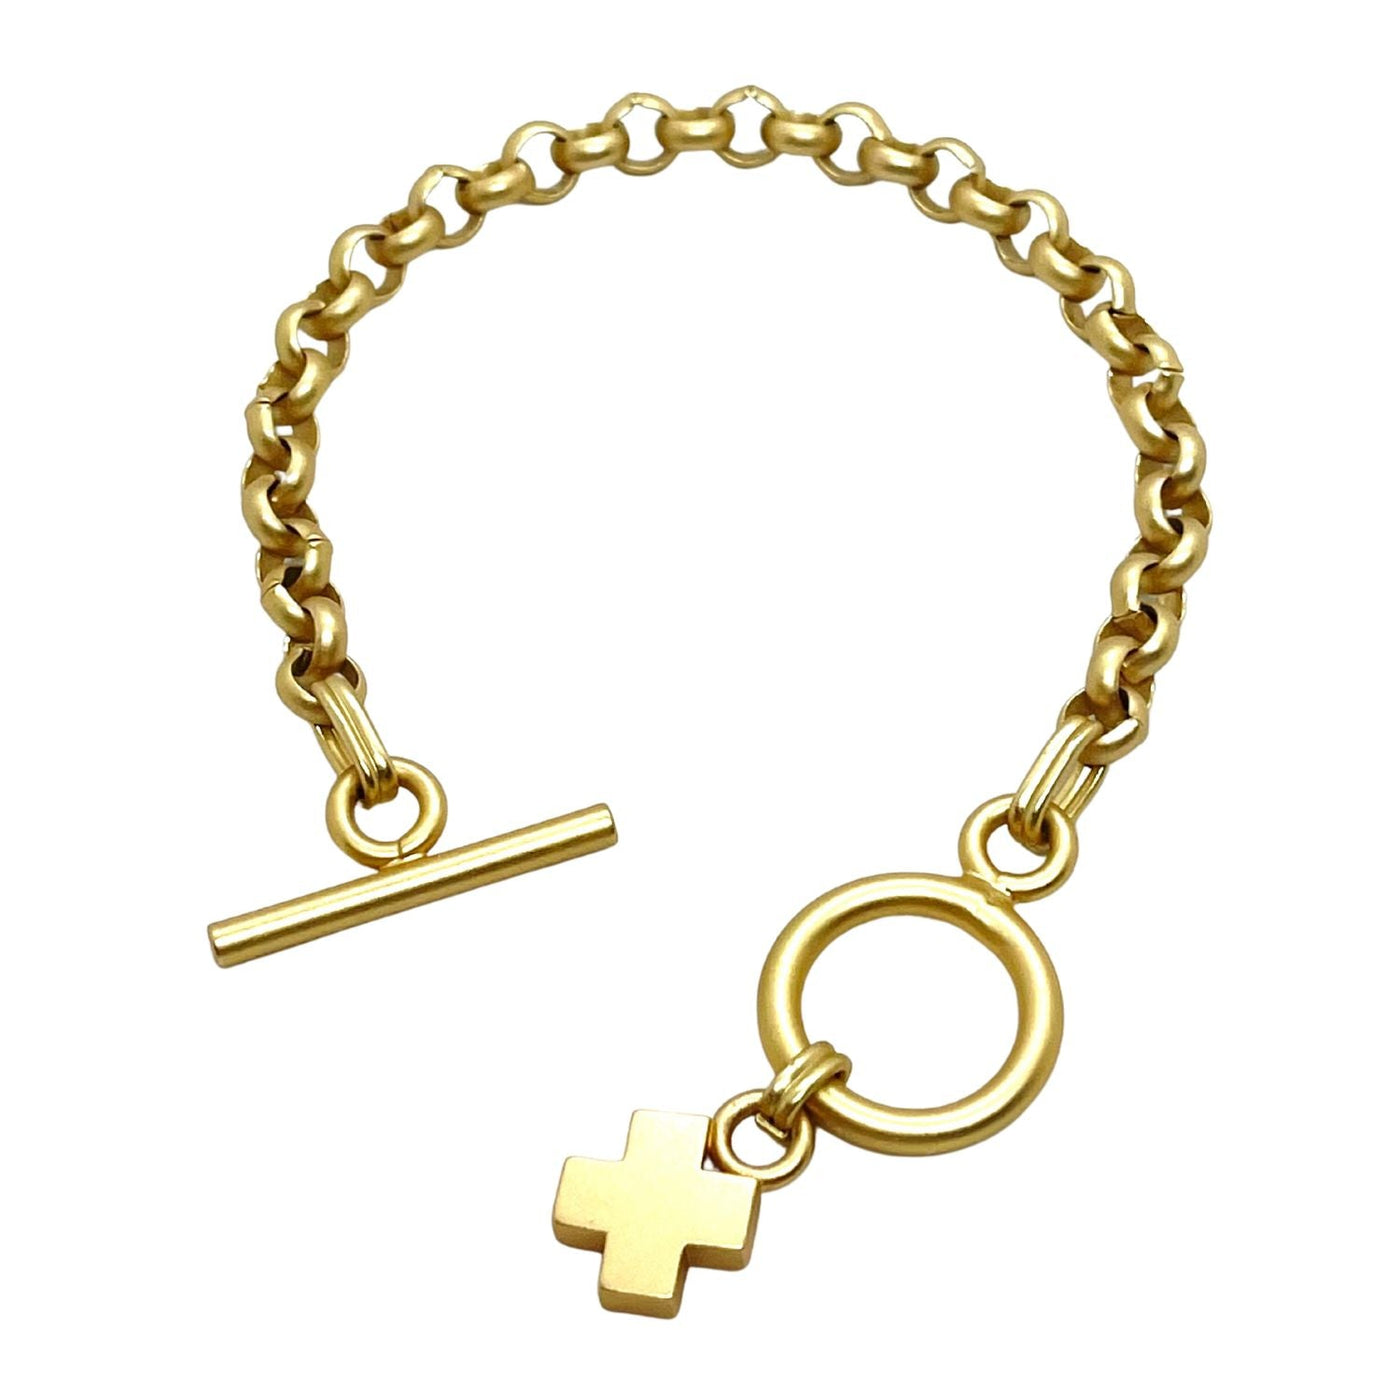 Matte Gold Chain Bracelet With X Charm